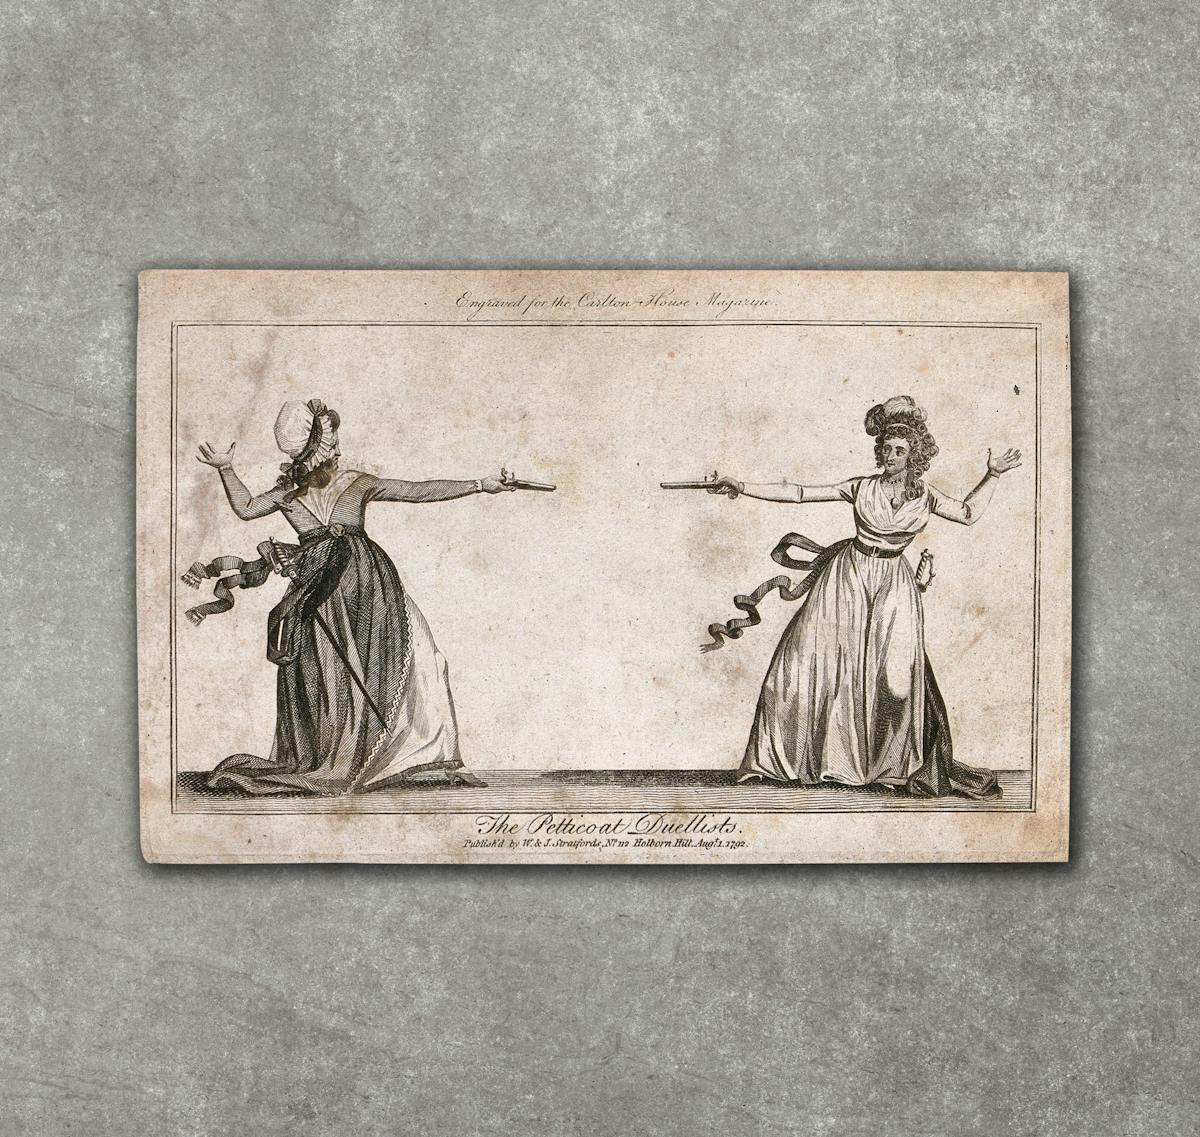 Archive engraving from 1792 showing a lady and a woman of lower rank duelling with pistols. They are facing each other, pistols drawn and pointing at each other. Their other arm and hand are raised. They are both wearing long full skirts and hats. Under the drawing is the title, 'The Petticoat Duellists'. The engraving is placed just above a grey concrete textured background such that a small shadow is cast.